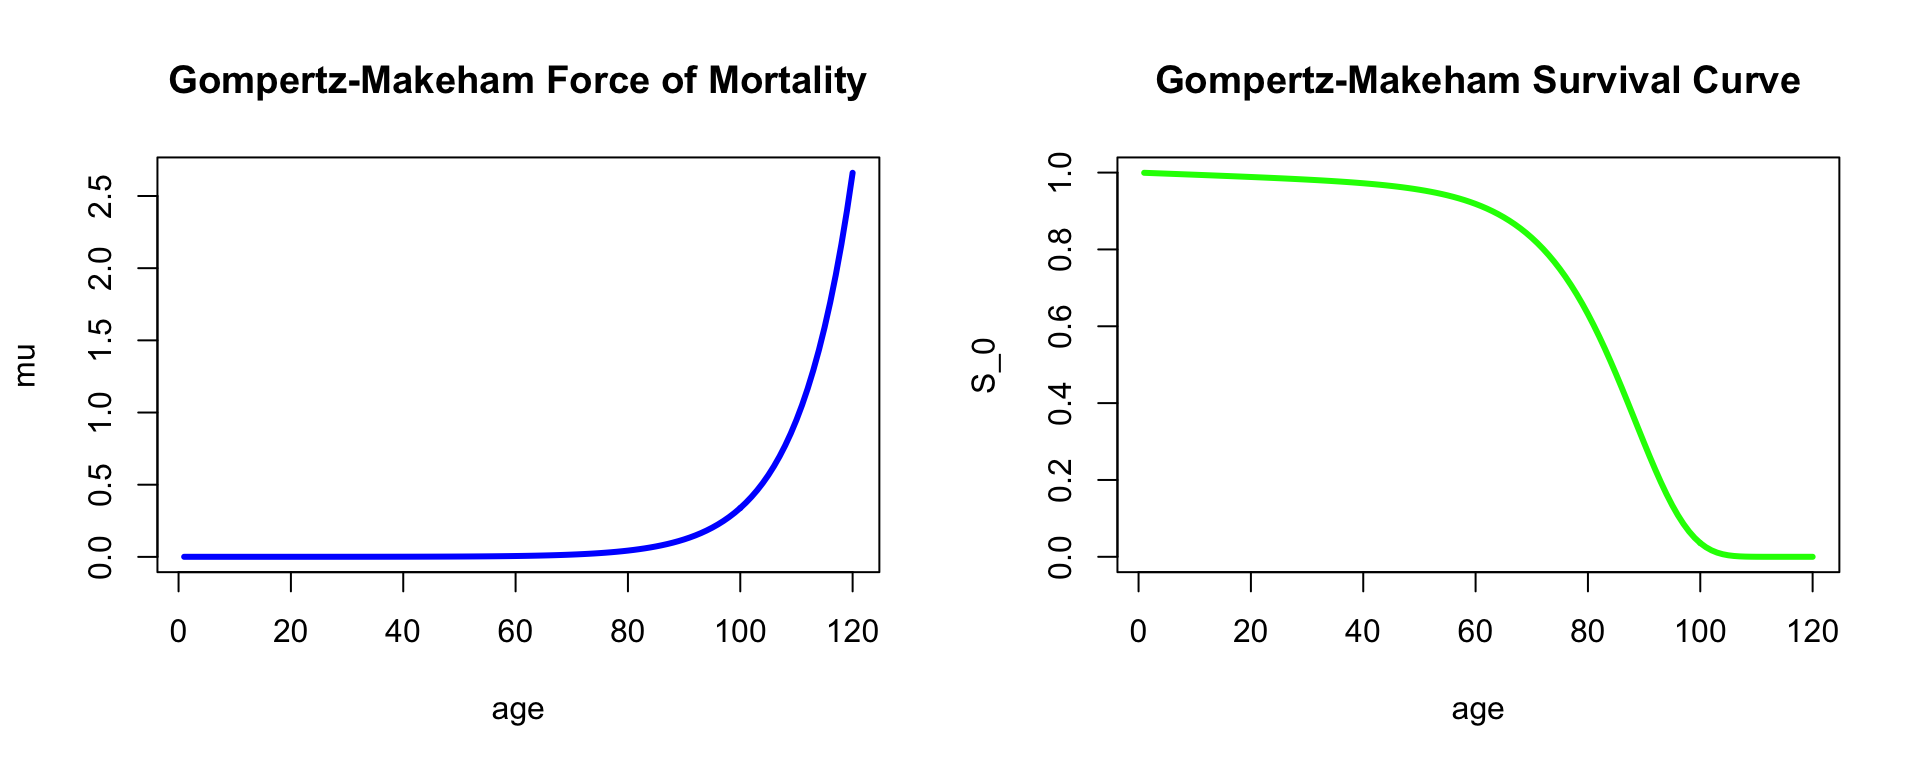 Fitted Force of Mortality and Survival Curve